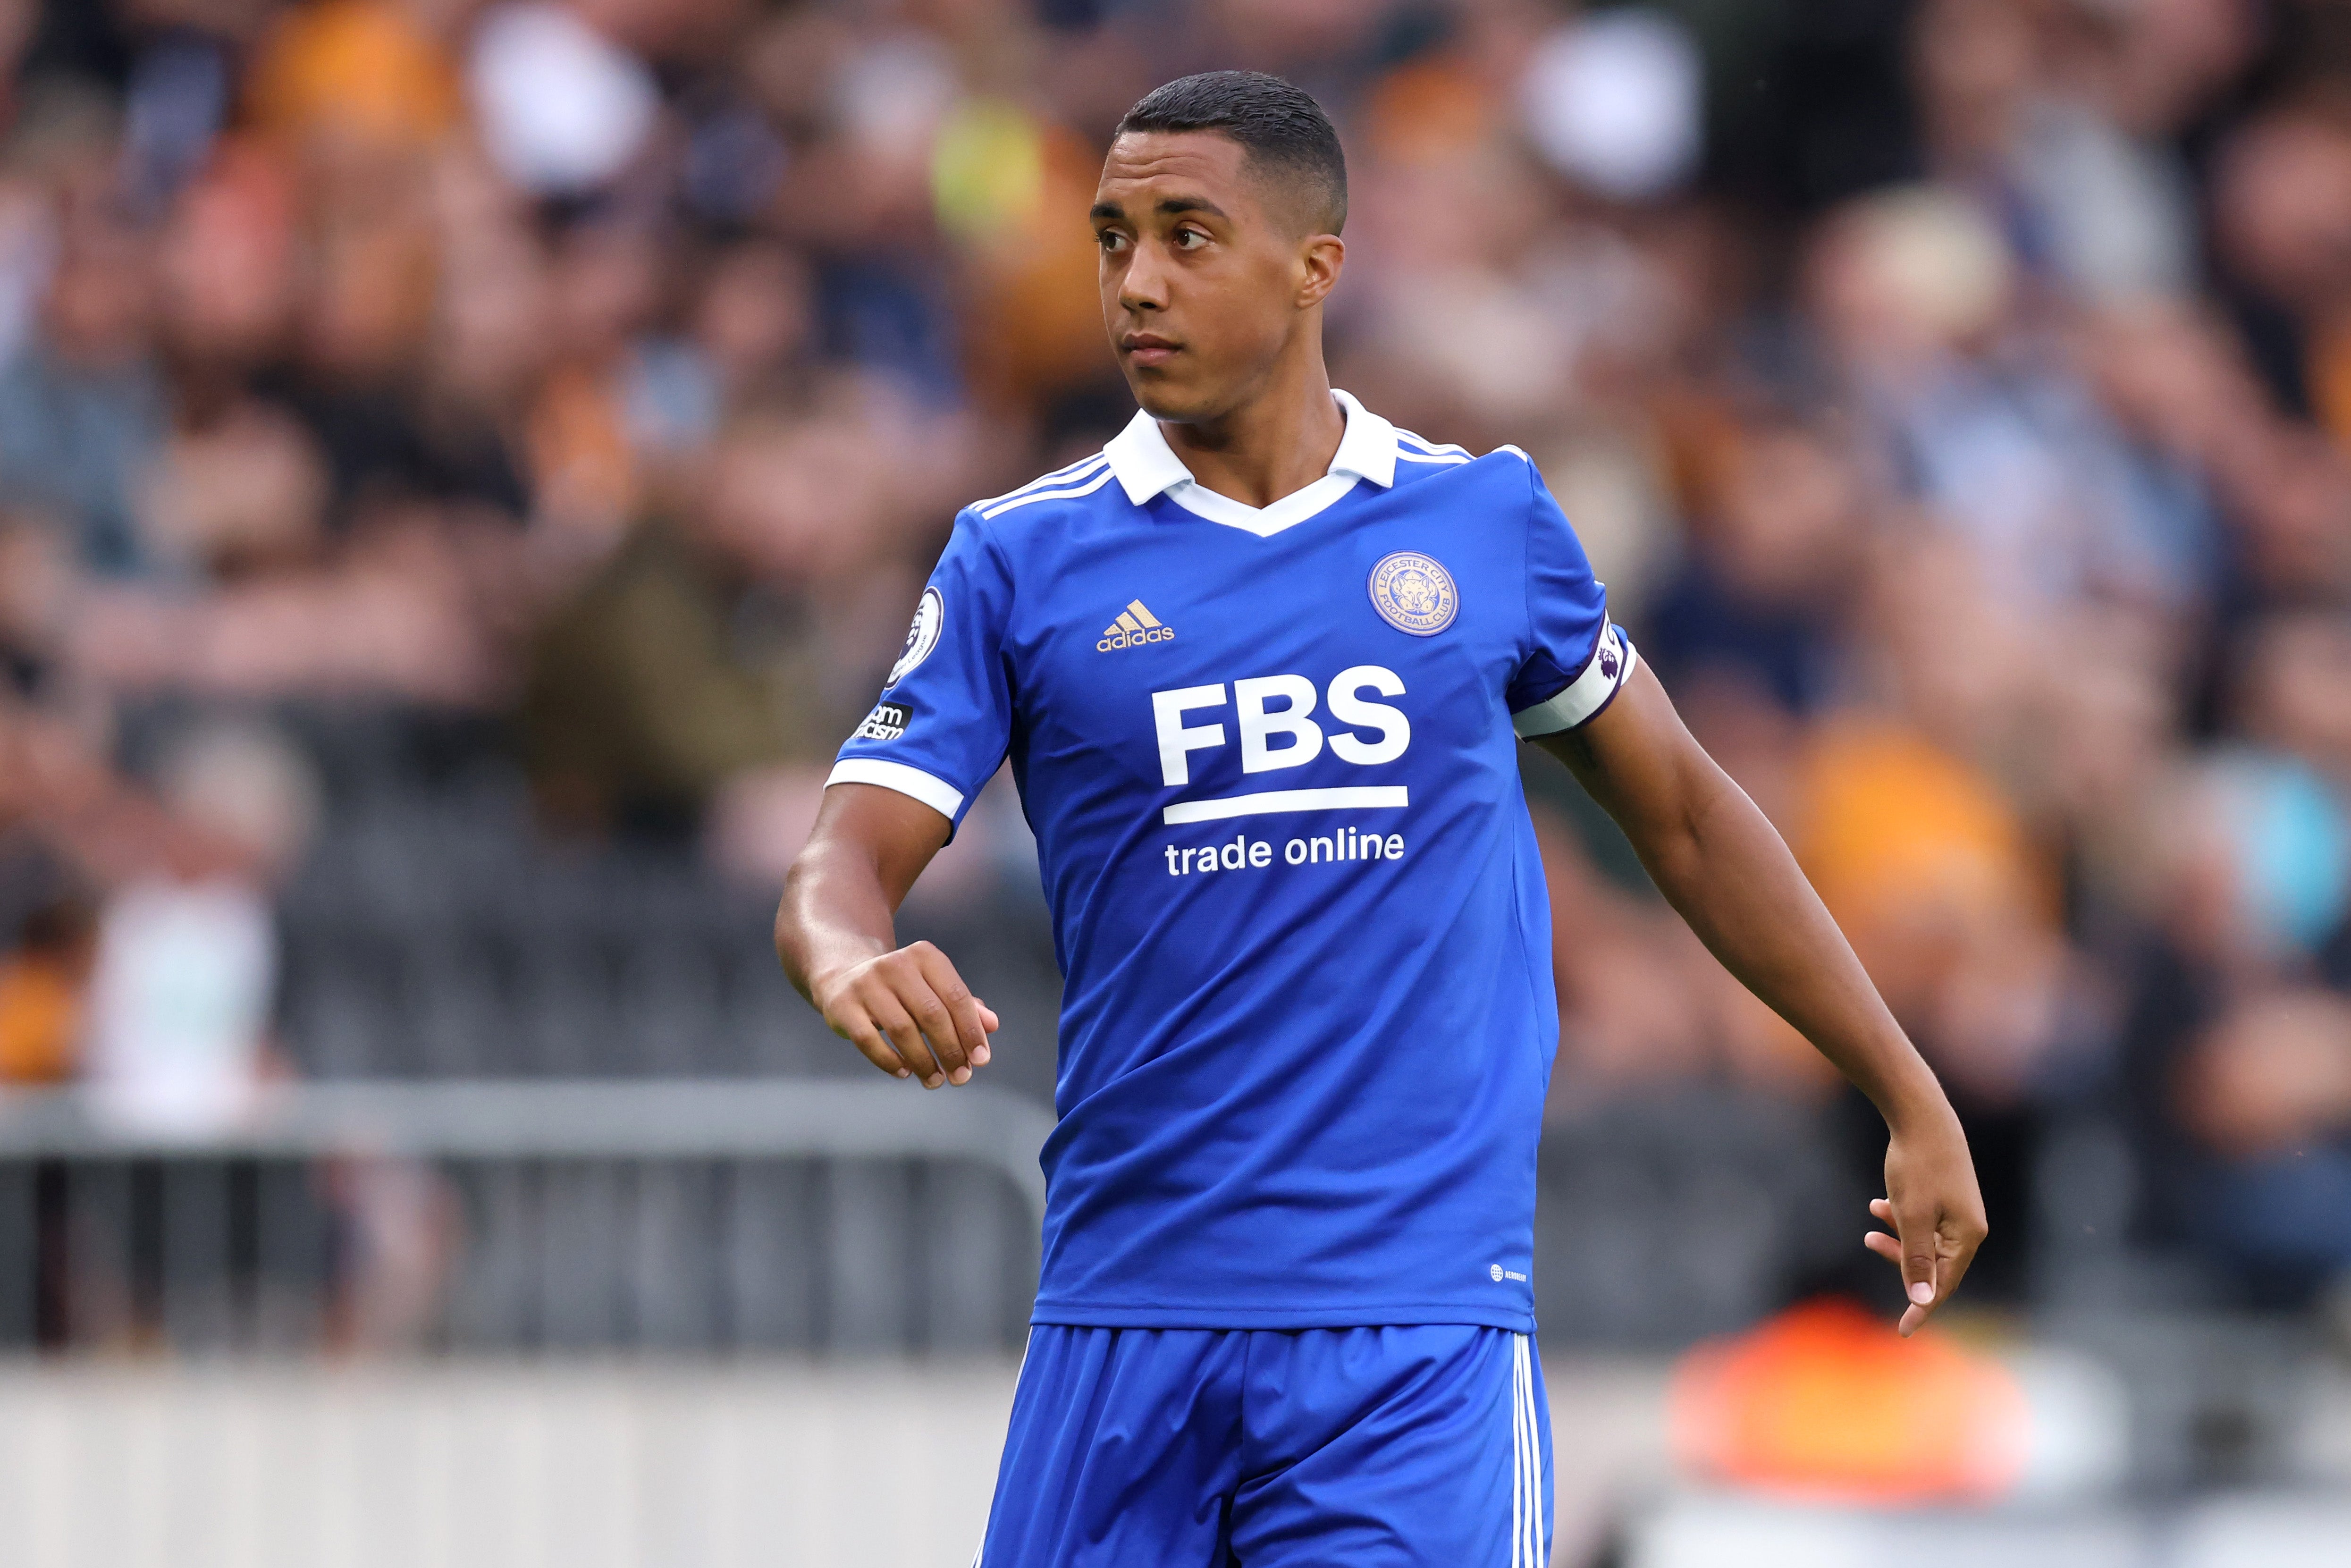 Youri Tielemans remains at the club despite interest from Arsenal